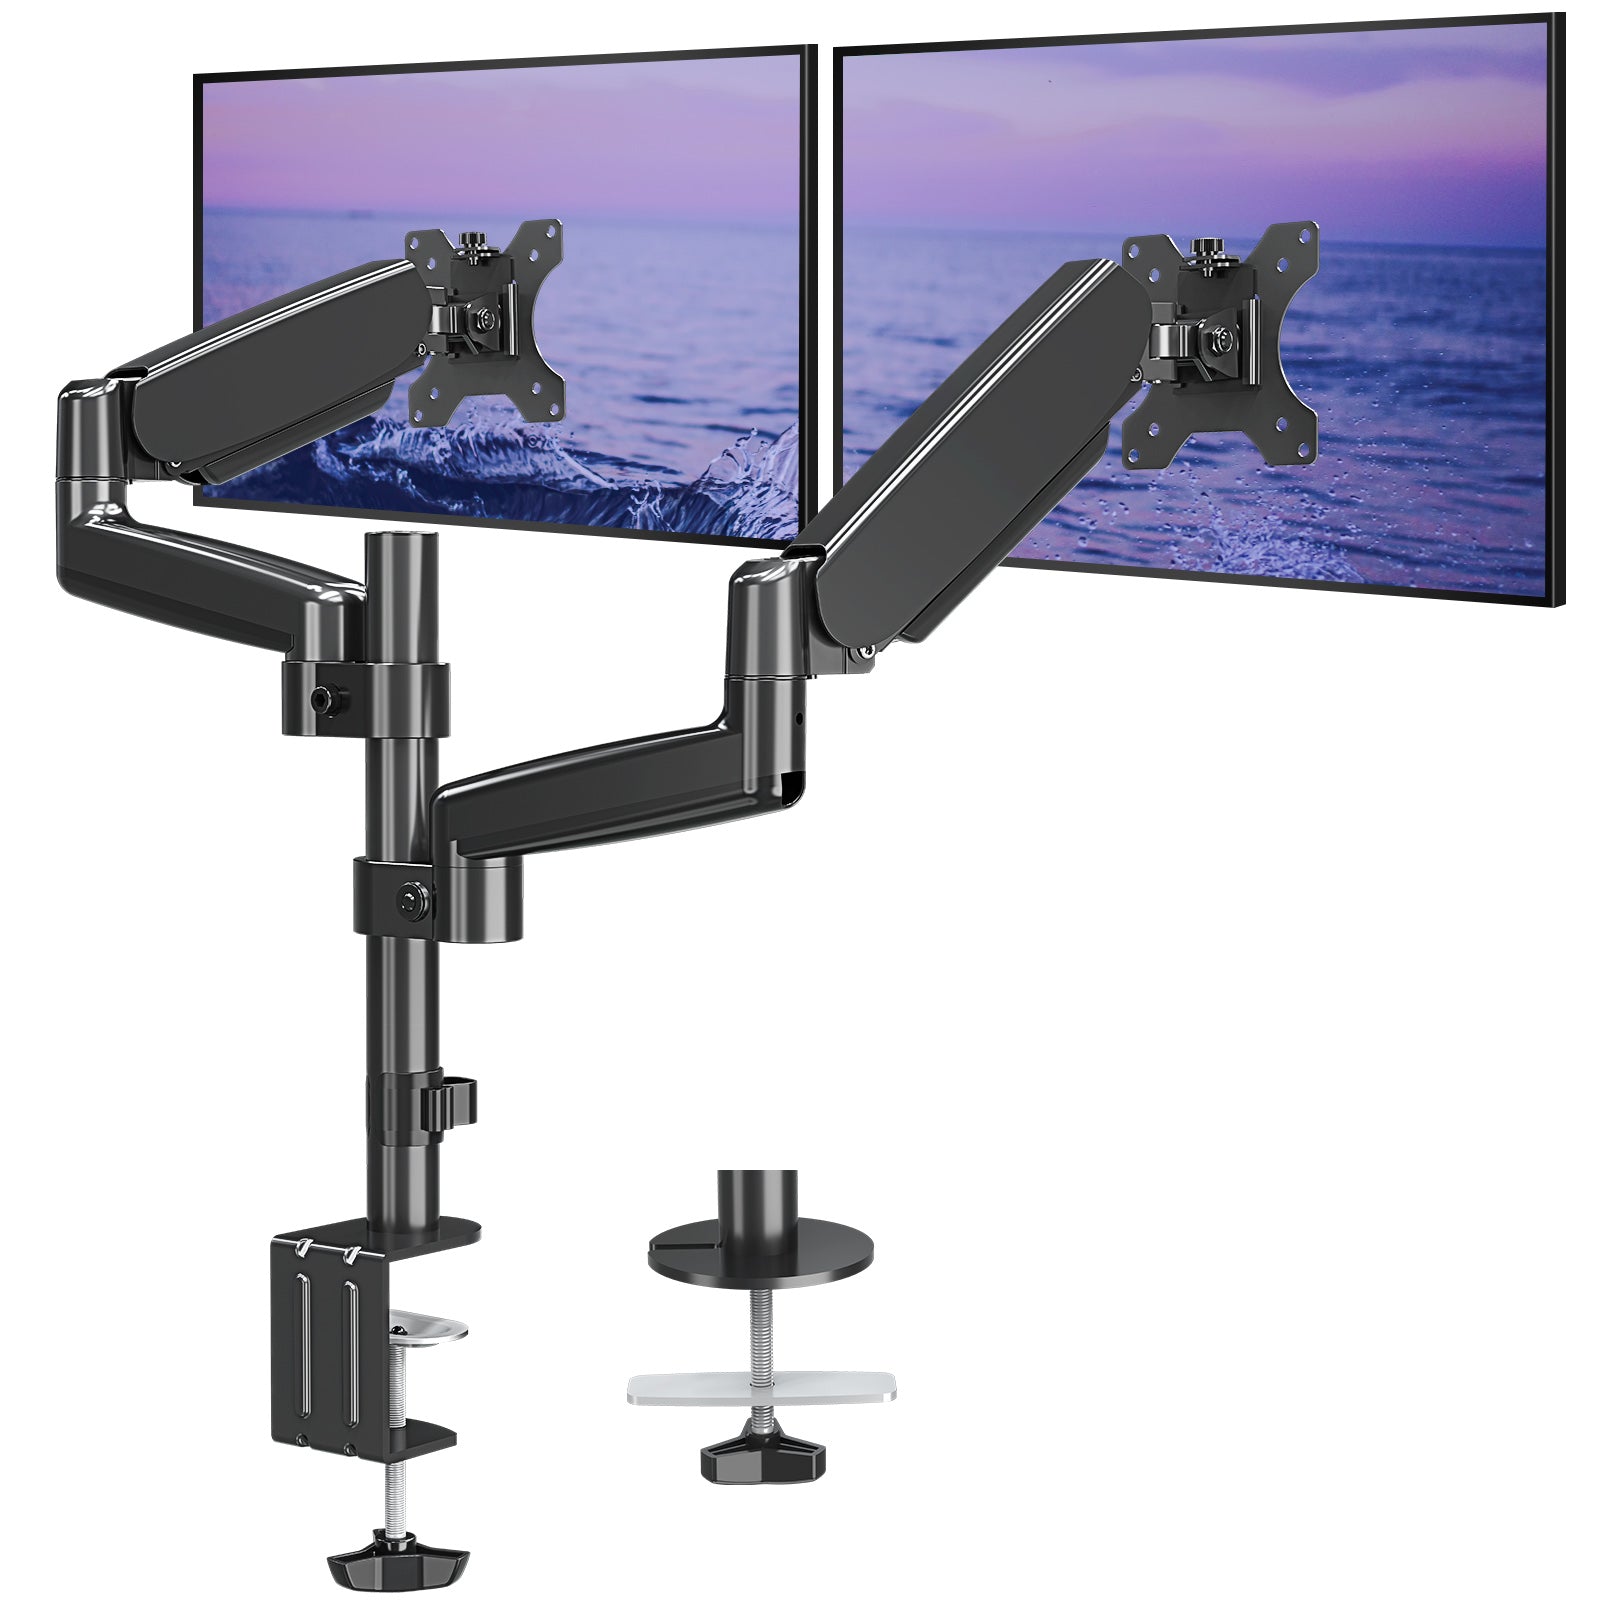 Dual Arms monitor mount with Gas Spring Arm